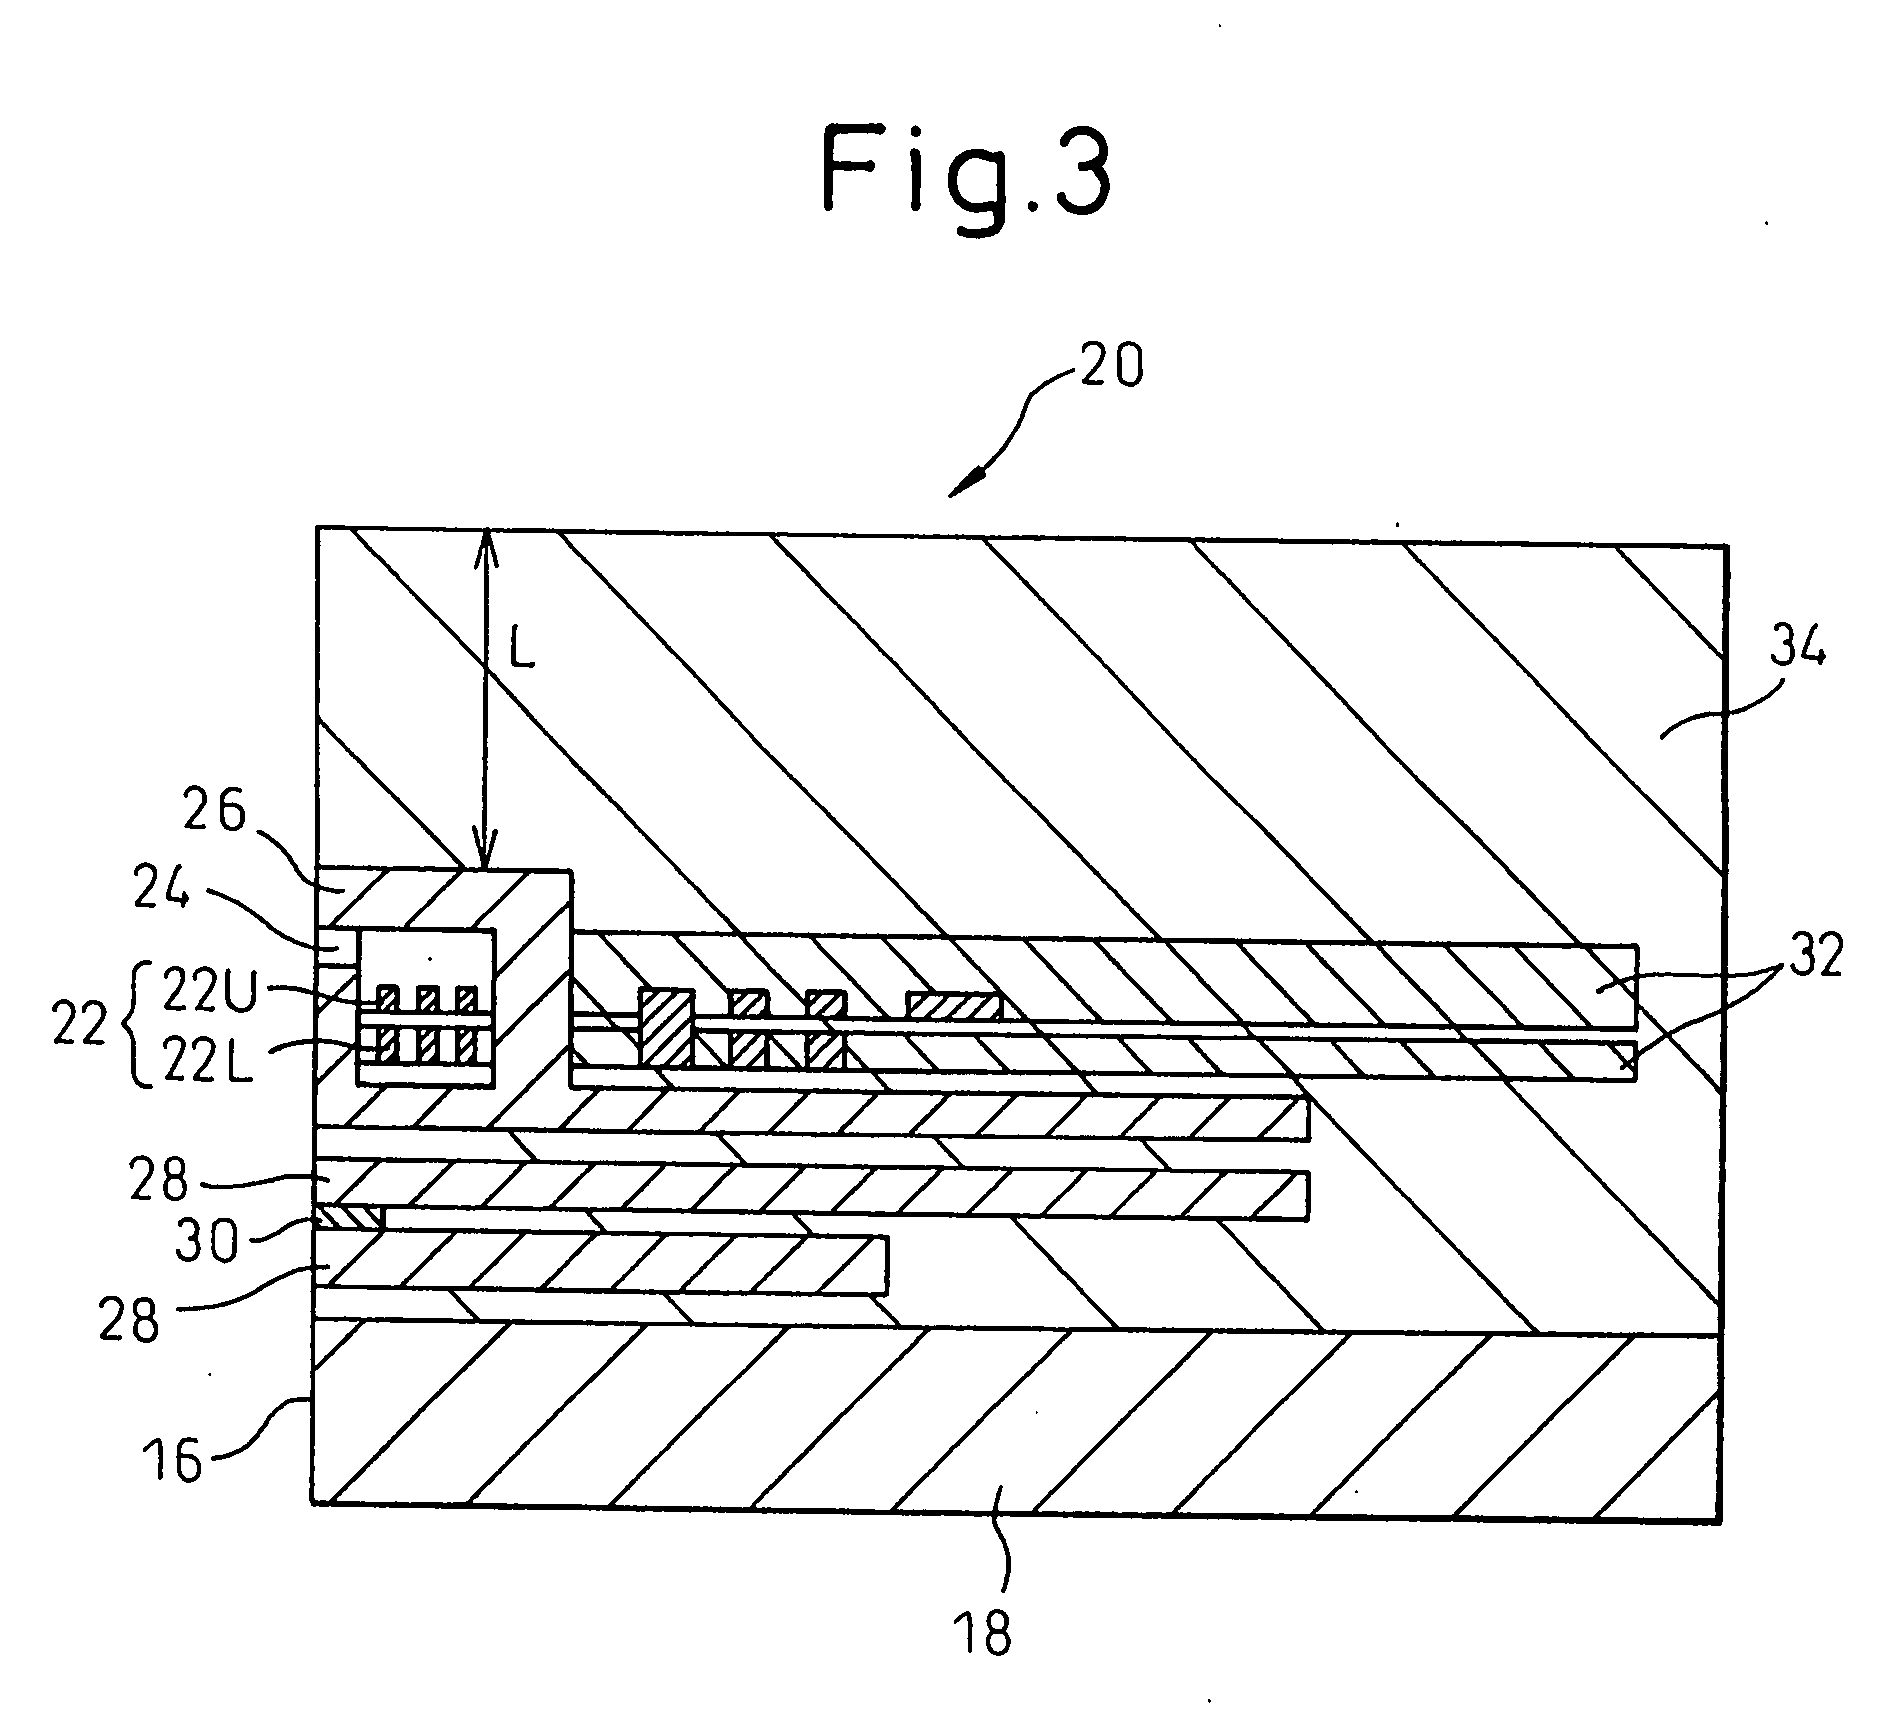 Magnetic head structure with enlarged insulating layer